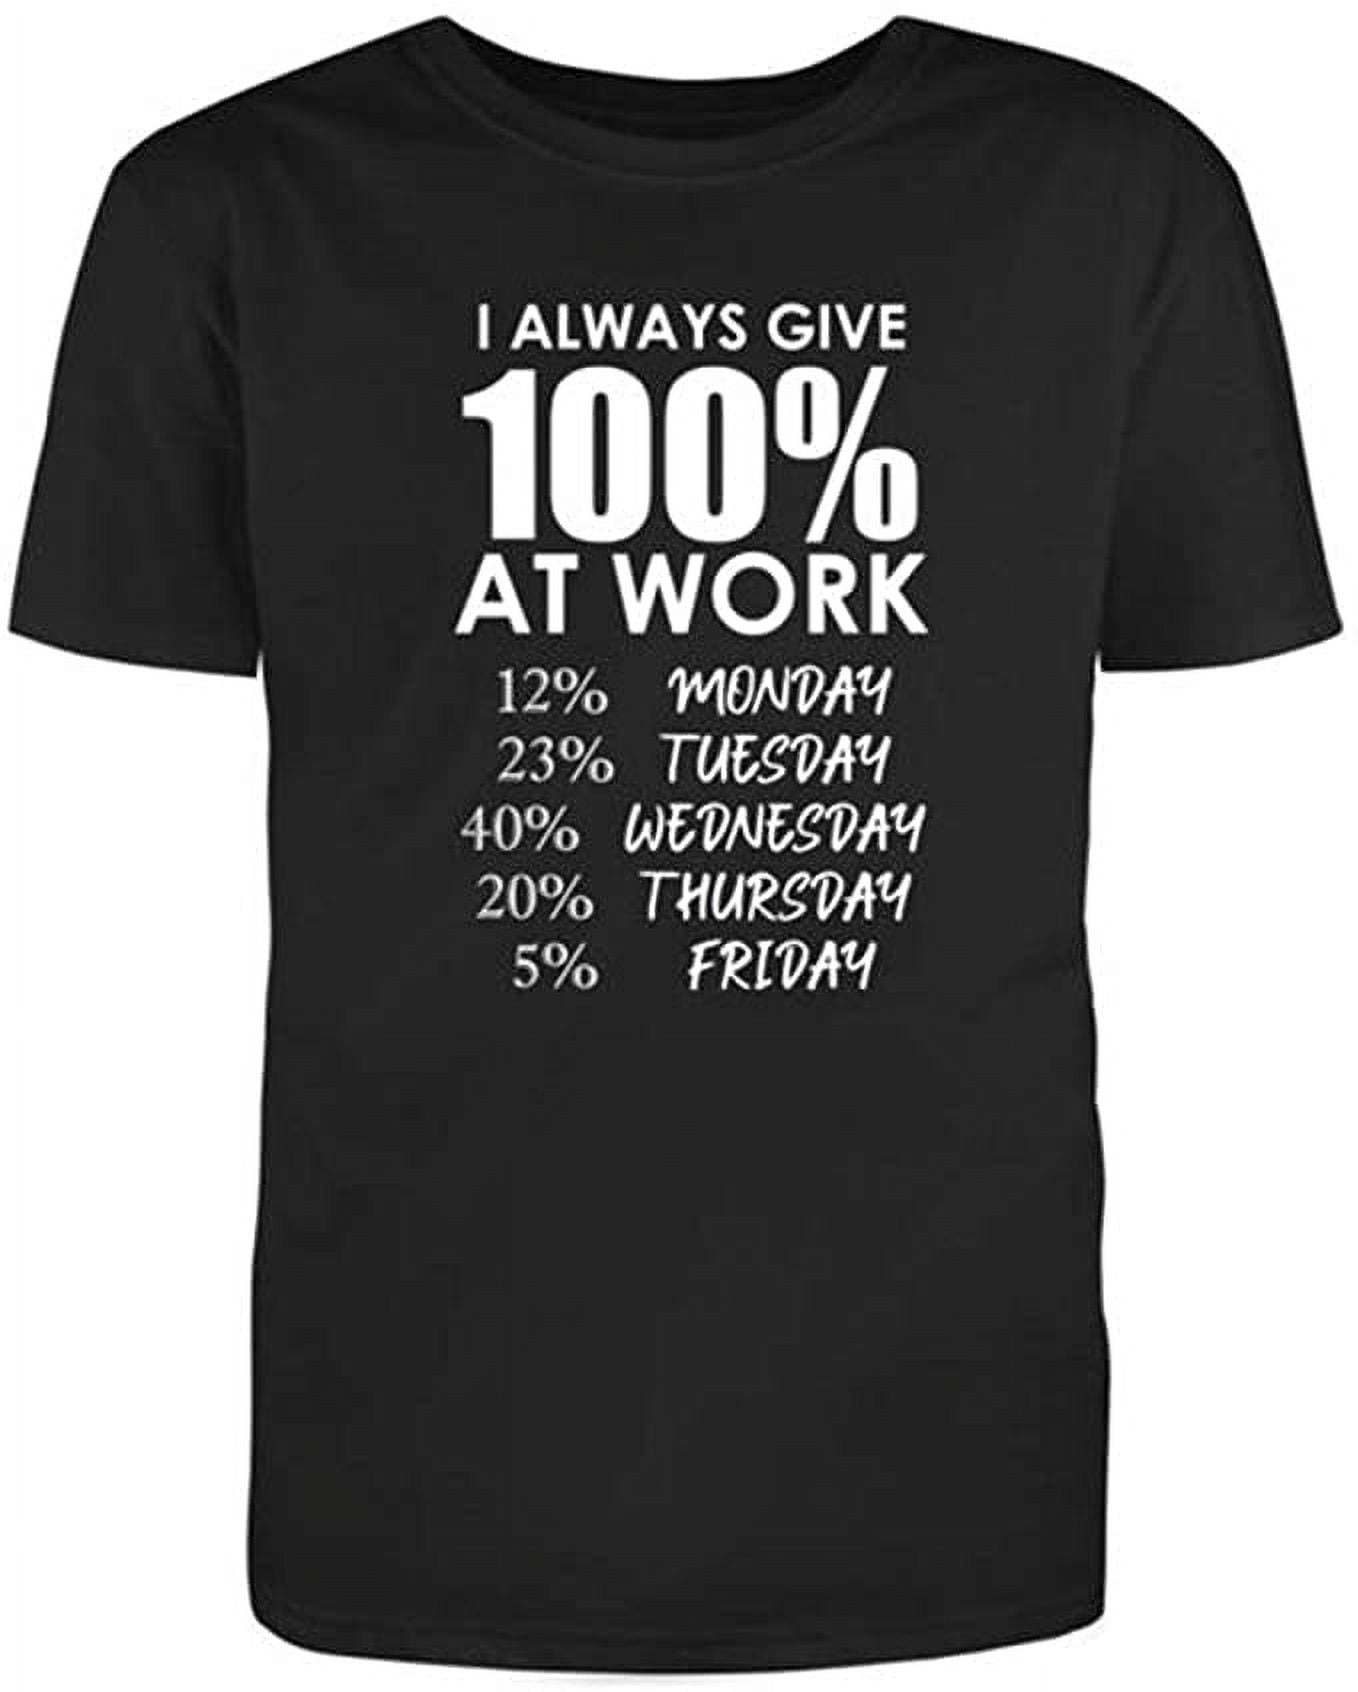 Always Give 100% at Work T-shirt Funny Shirts – Jon's Imports Inc